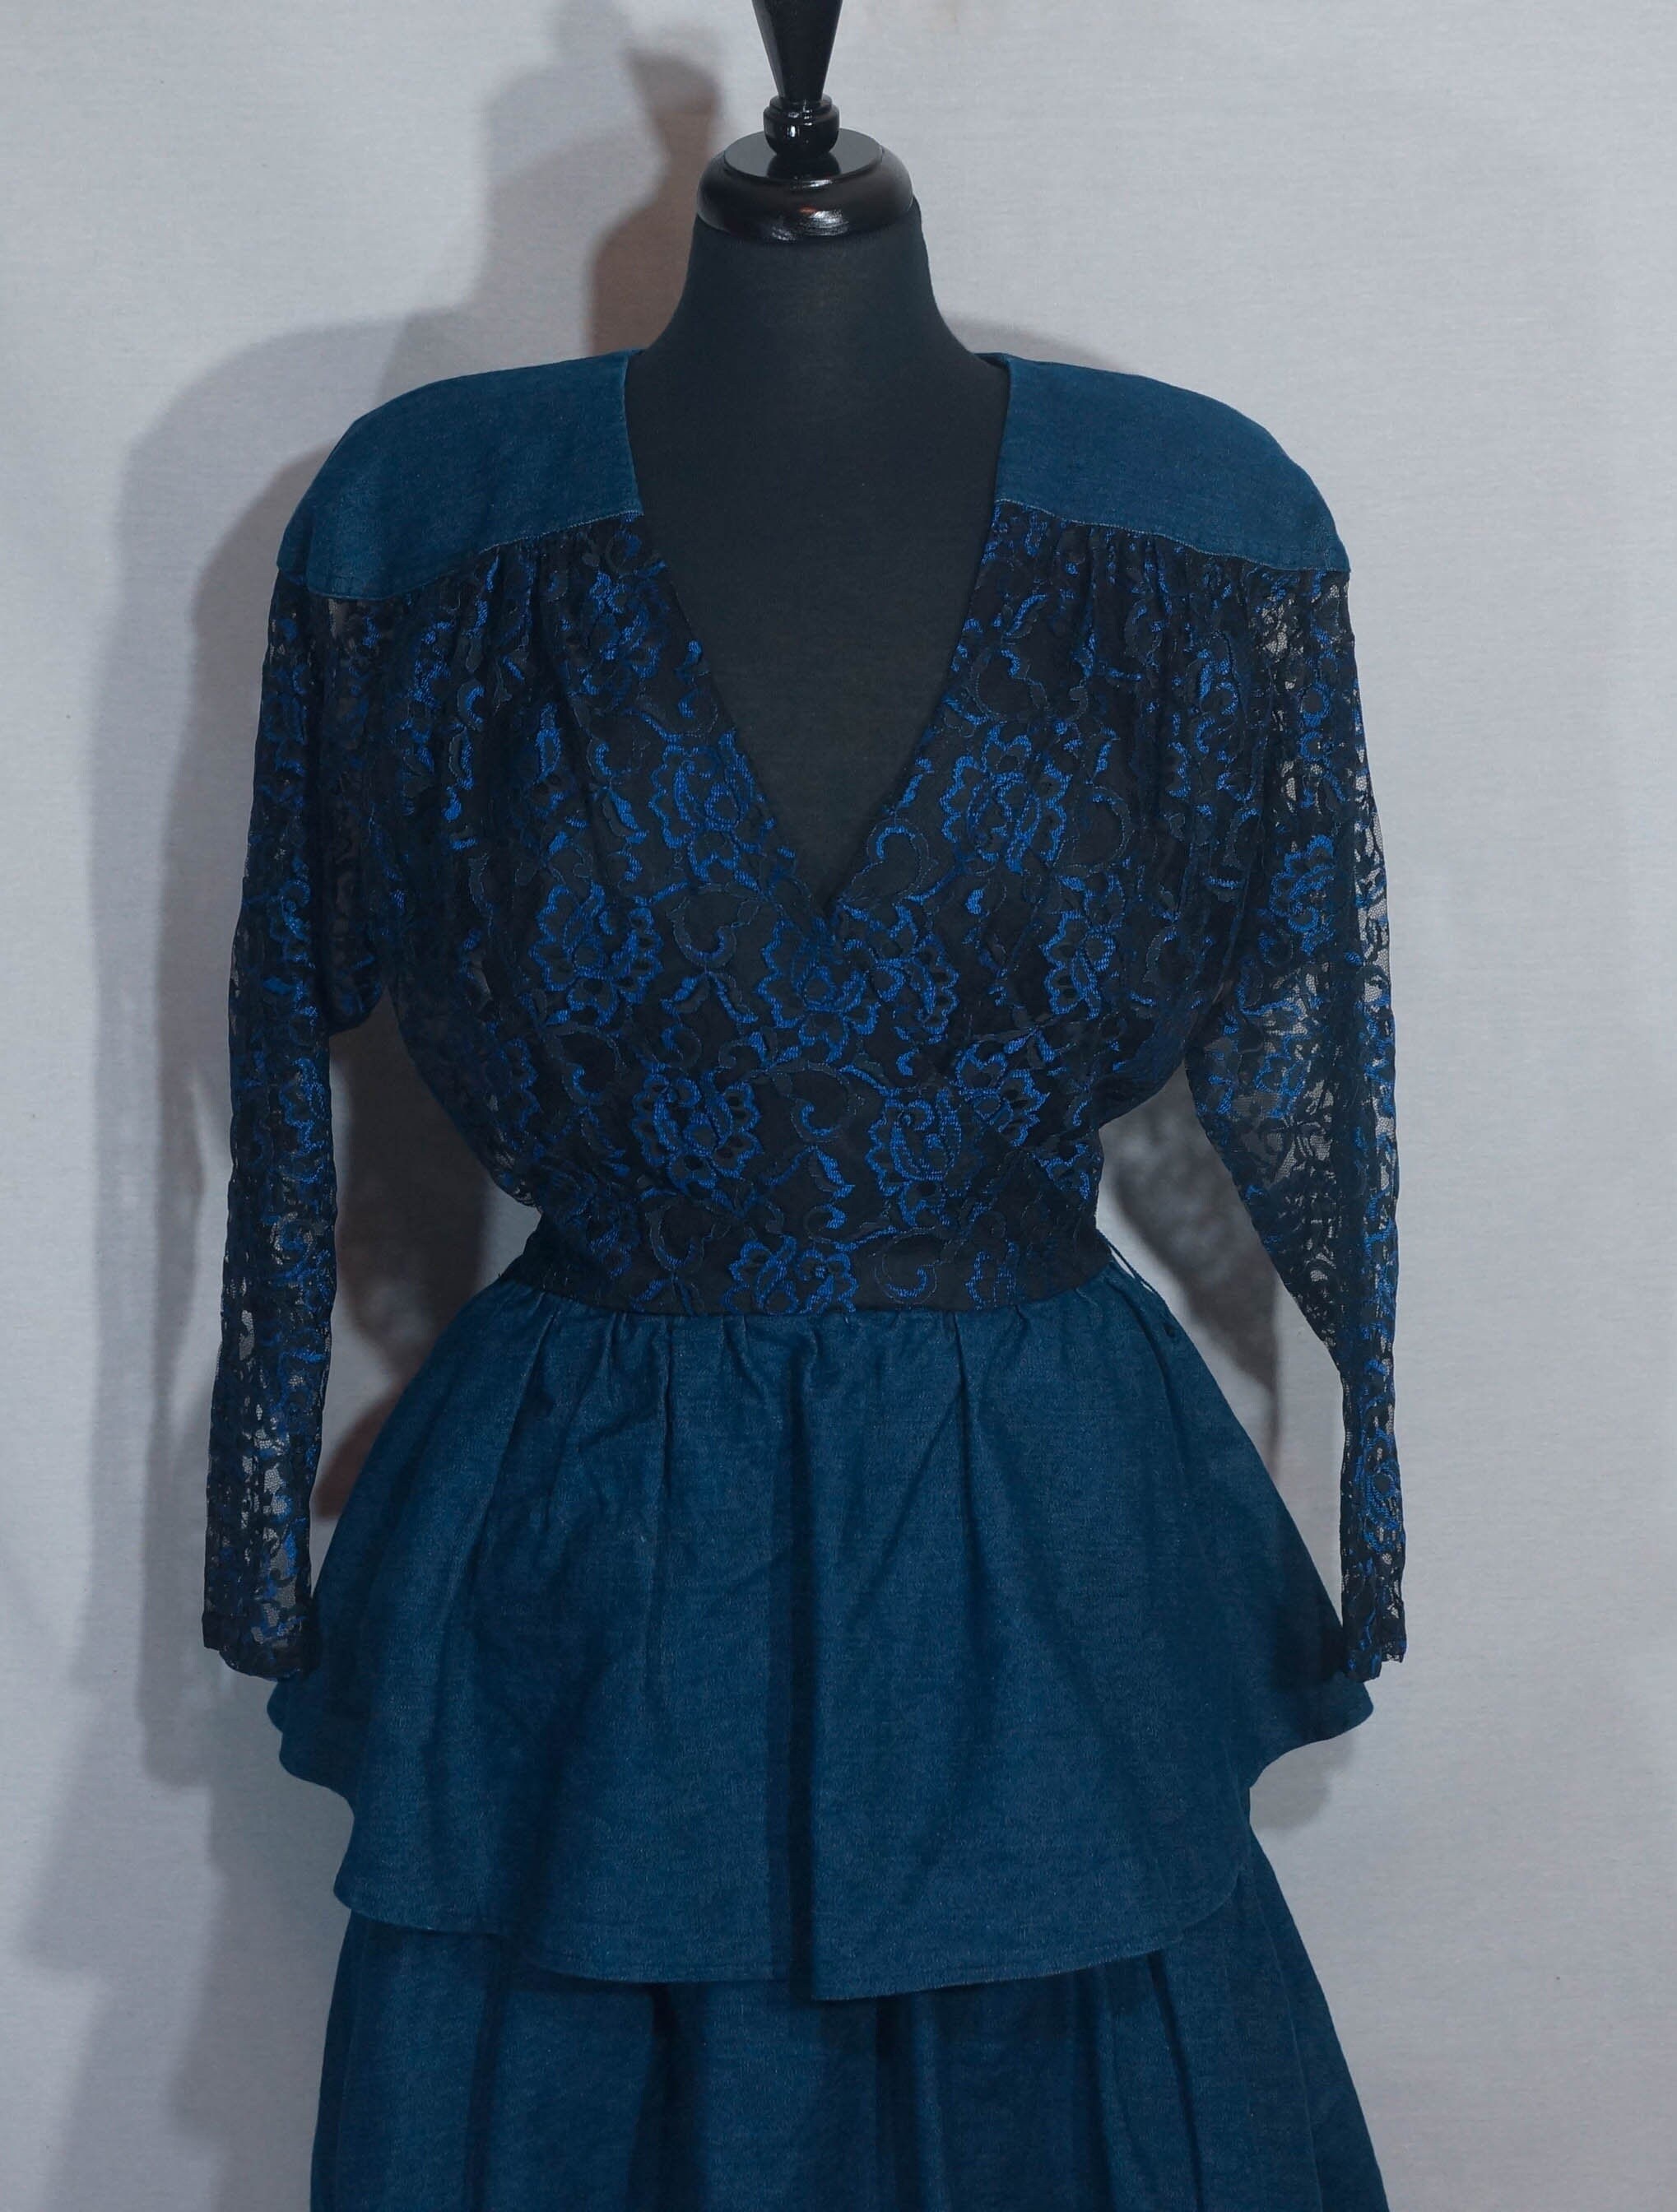 Vintage Dress Designer Antonio Rupoli Lace Ruffles Old West Saloon Style Made in USA 31 Waist